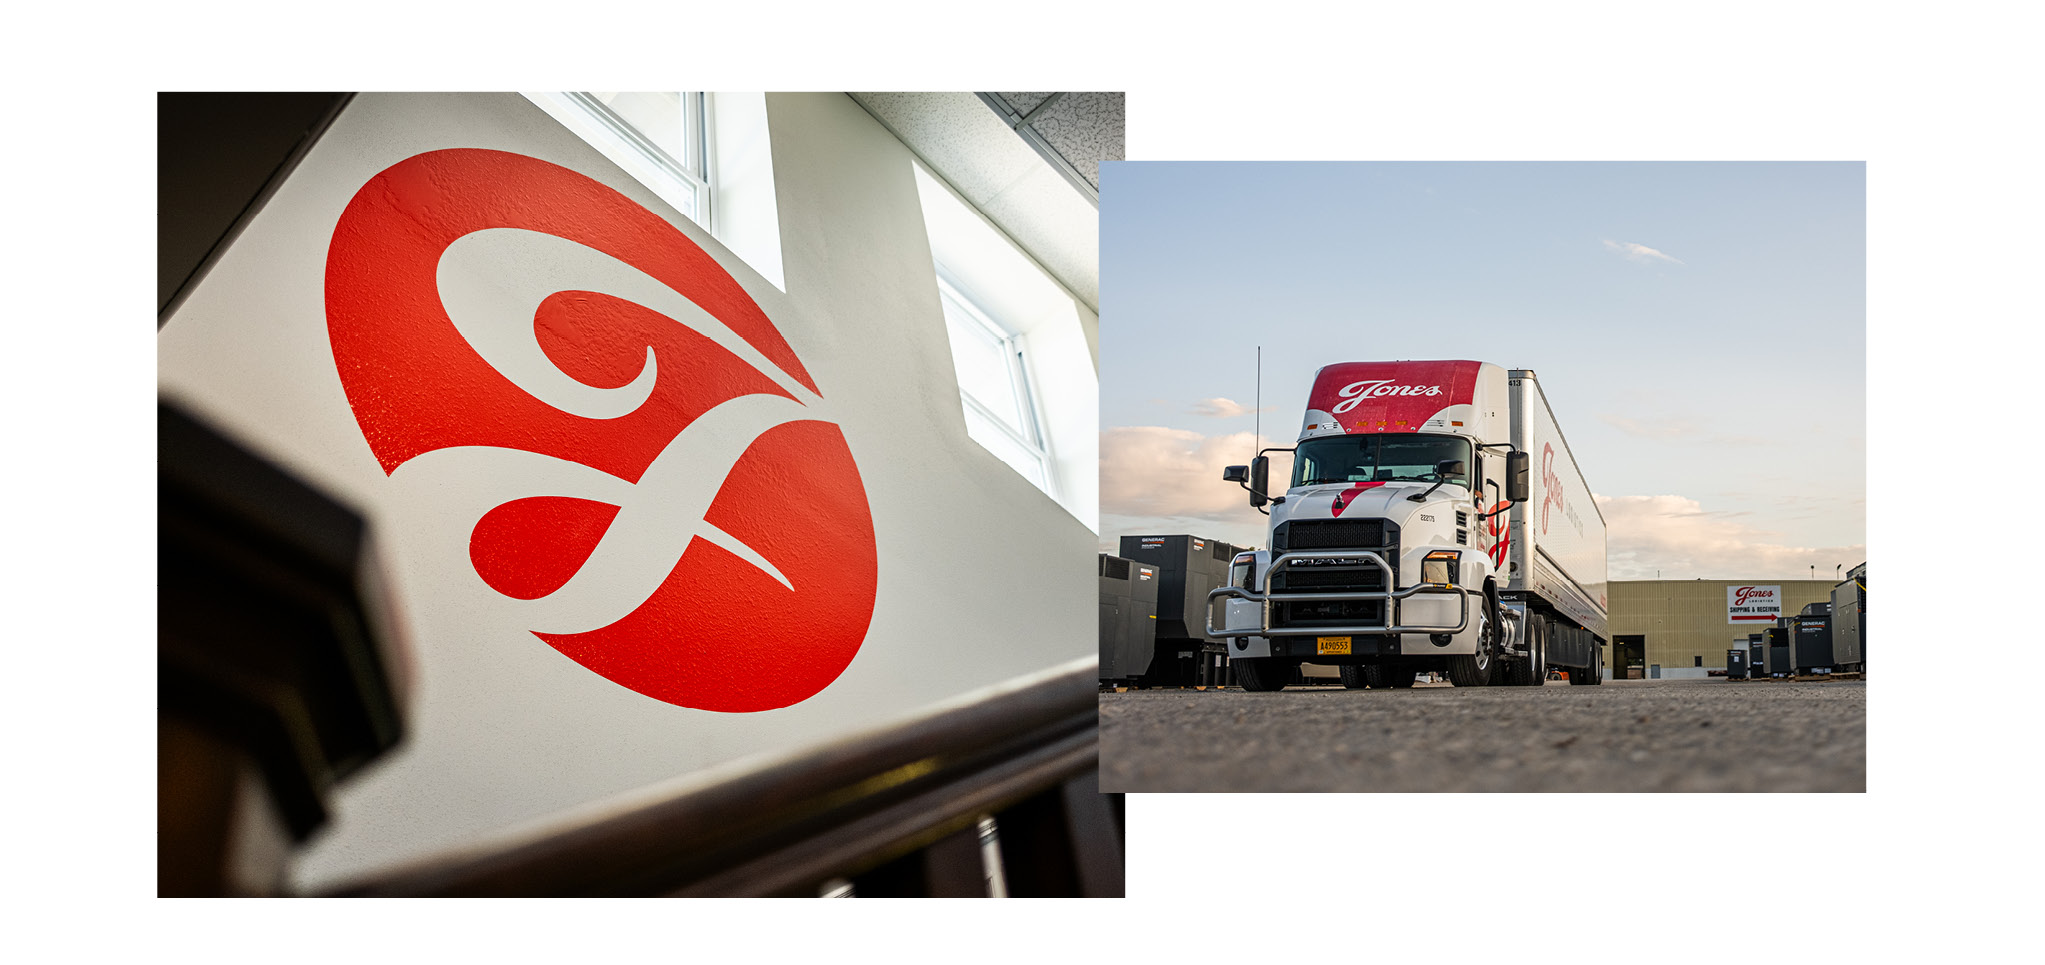 Two square images pictured: One image with a J centered in the middle of an ellipses shape as a wall decal. The second image is of a Jones Logistics dedicated truck in front of the Waukesha, Wisconsin warehouse.